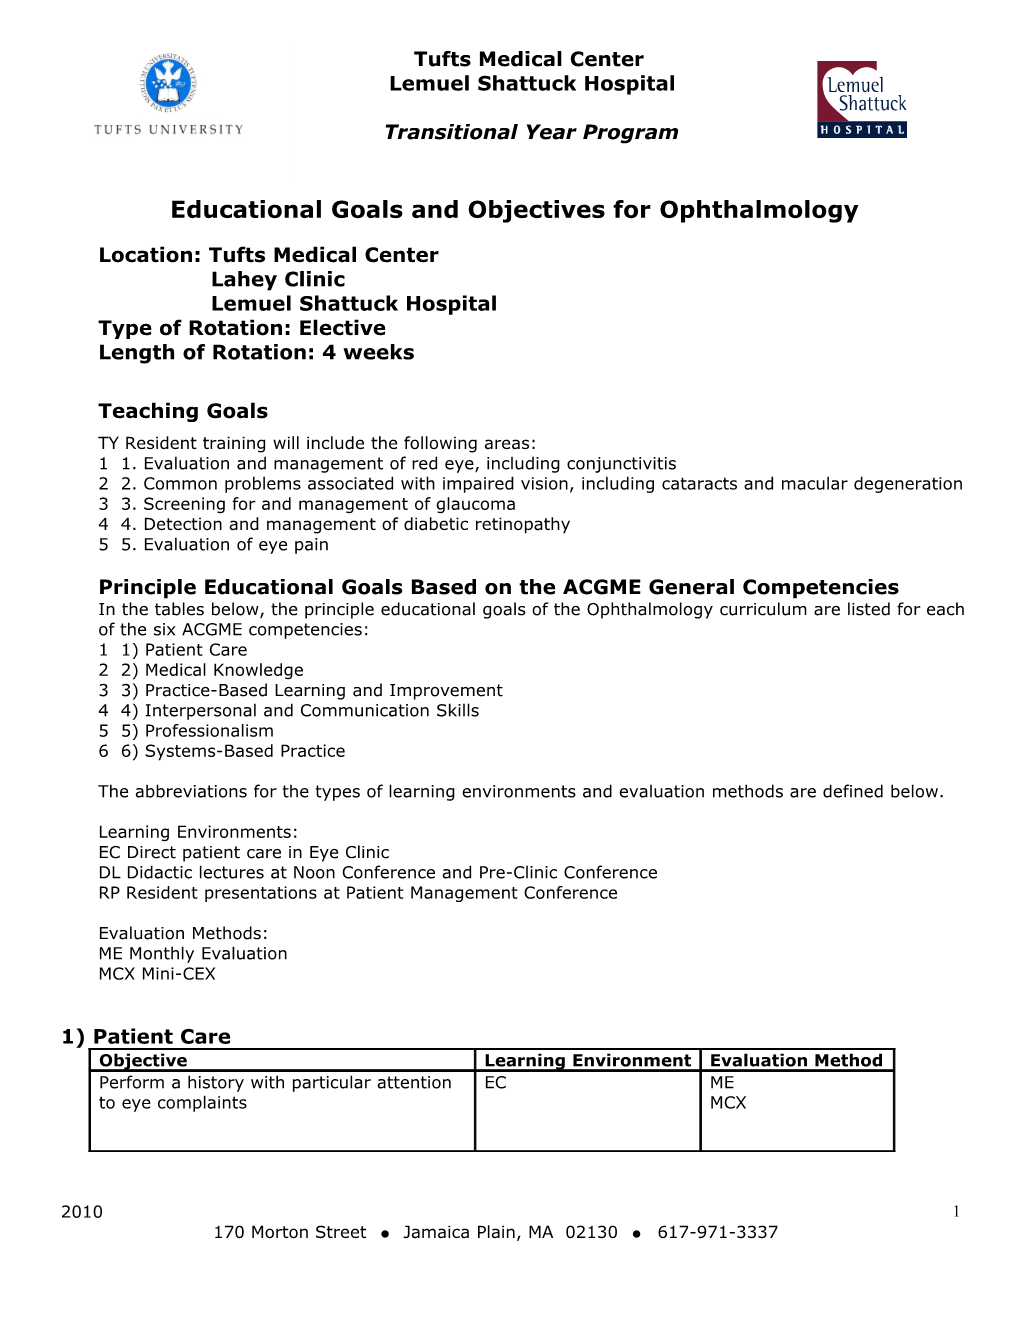 Educational Goals and Objectives for Ophthalmology